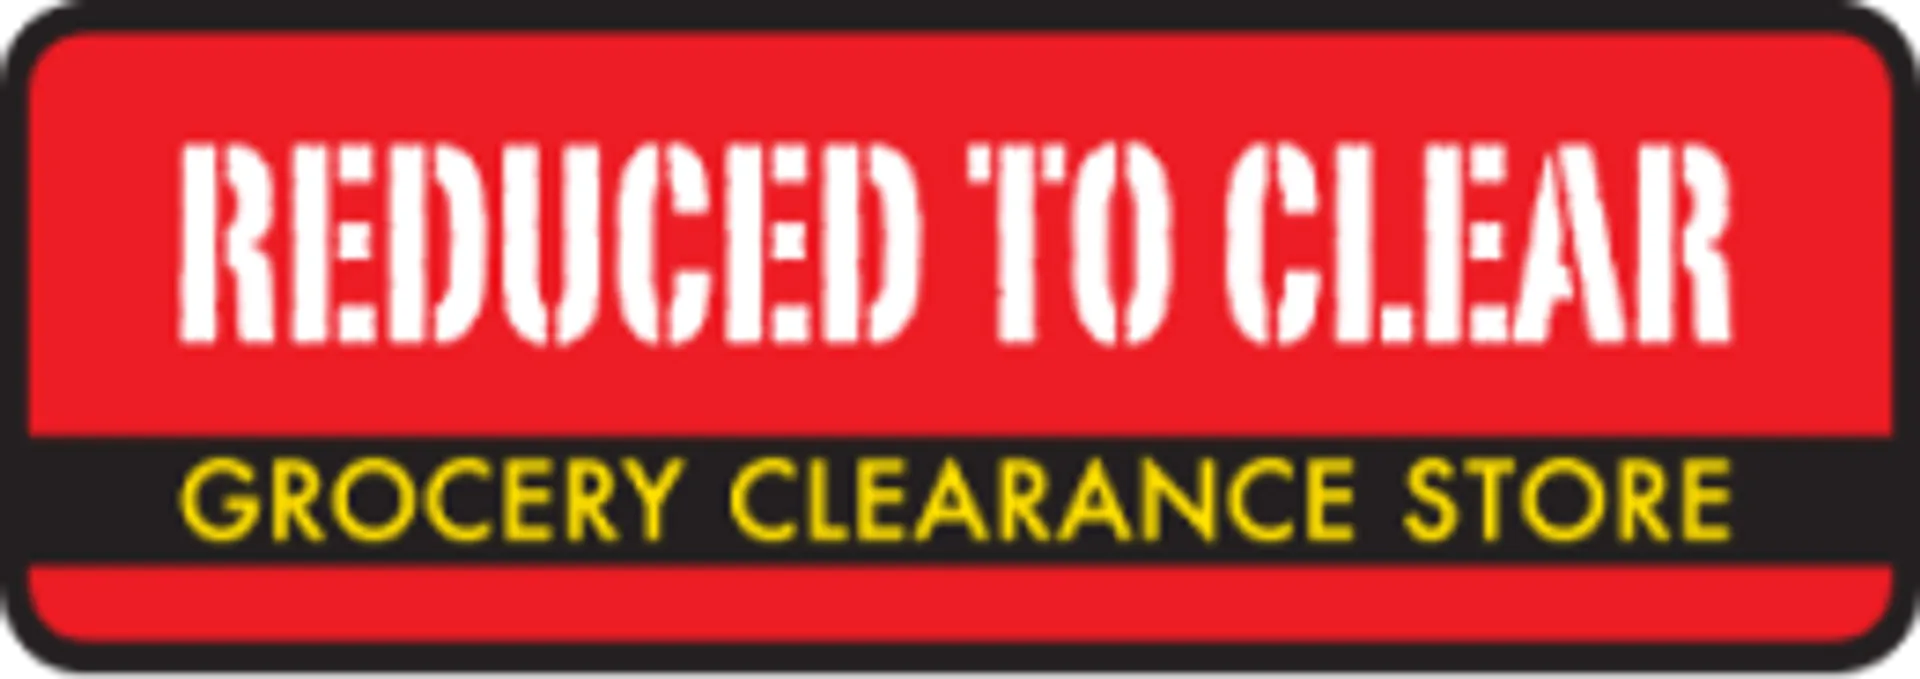 REDUCED TO CLEAR logo current weekly ad